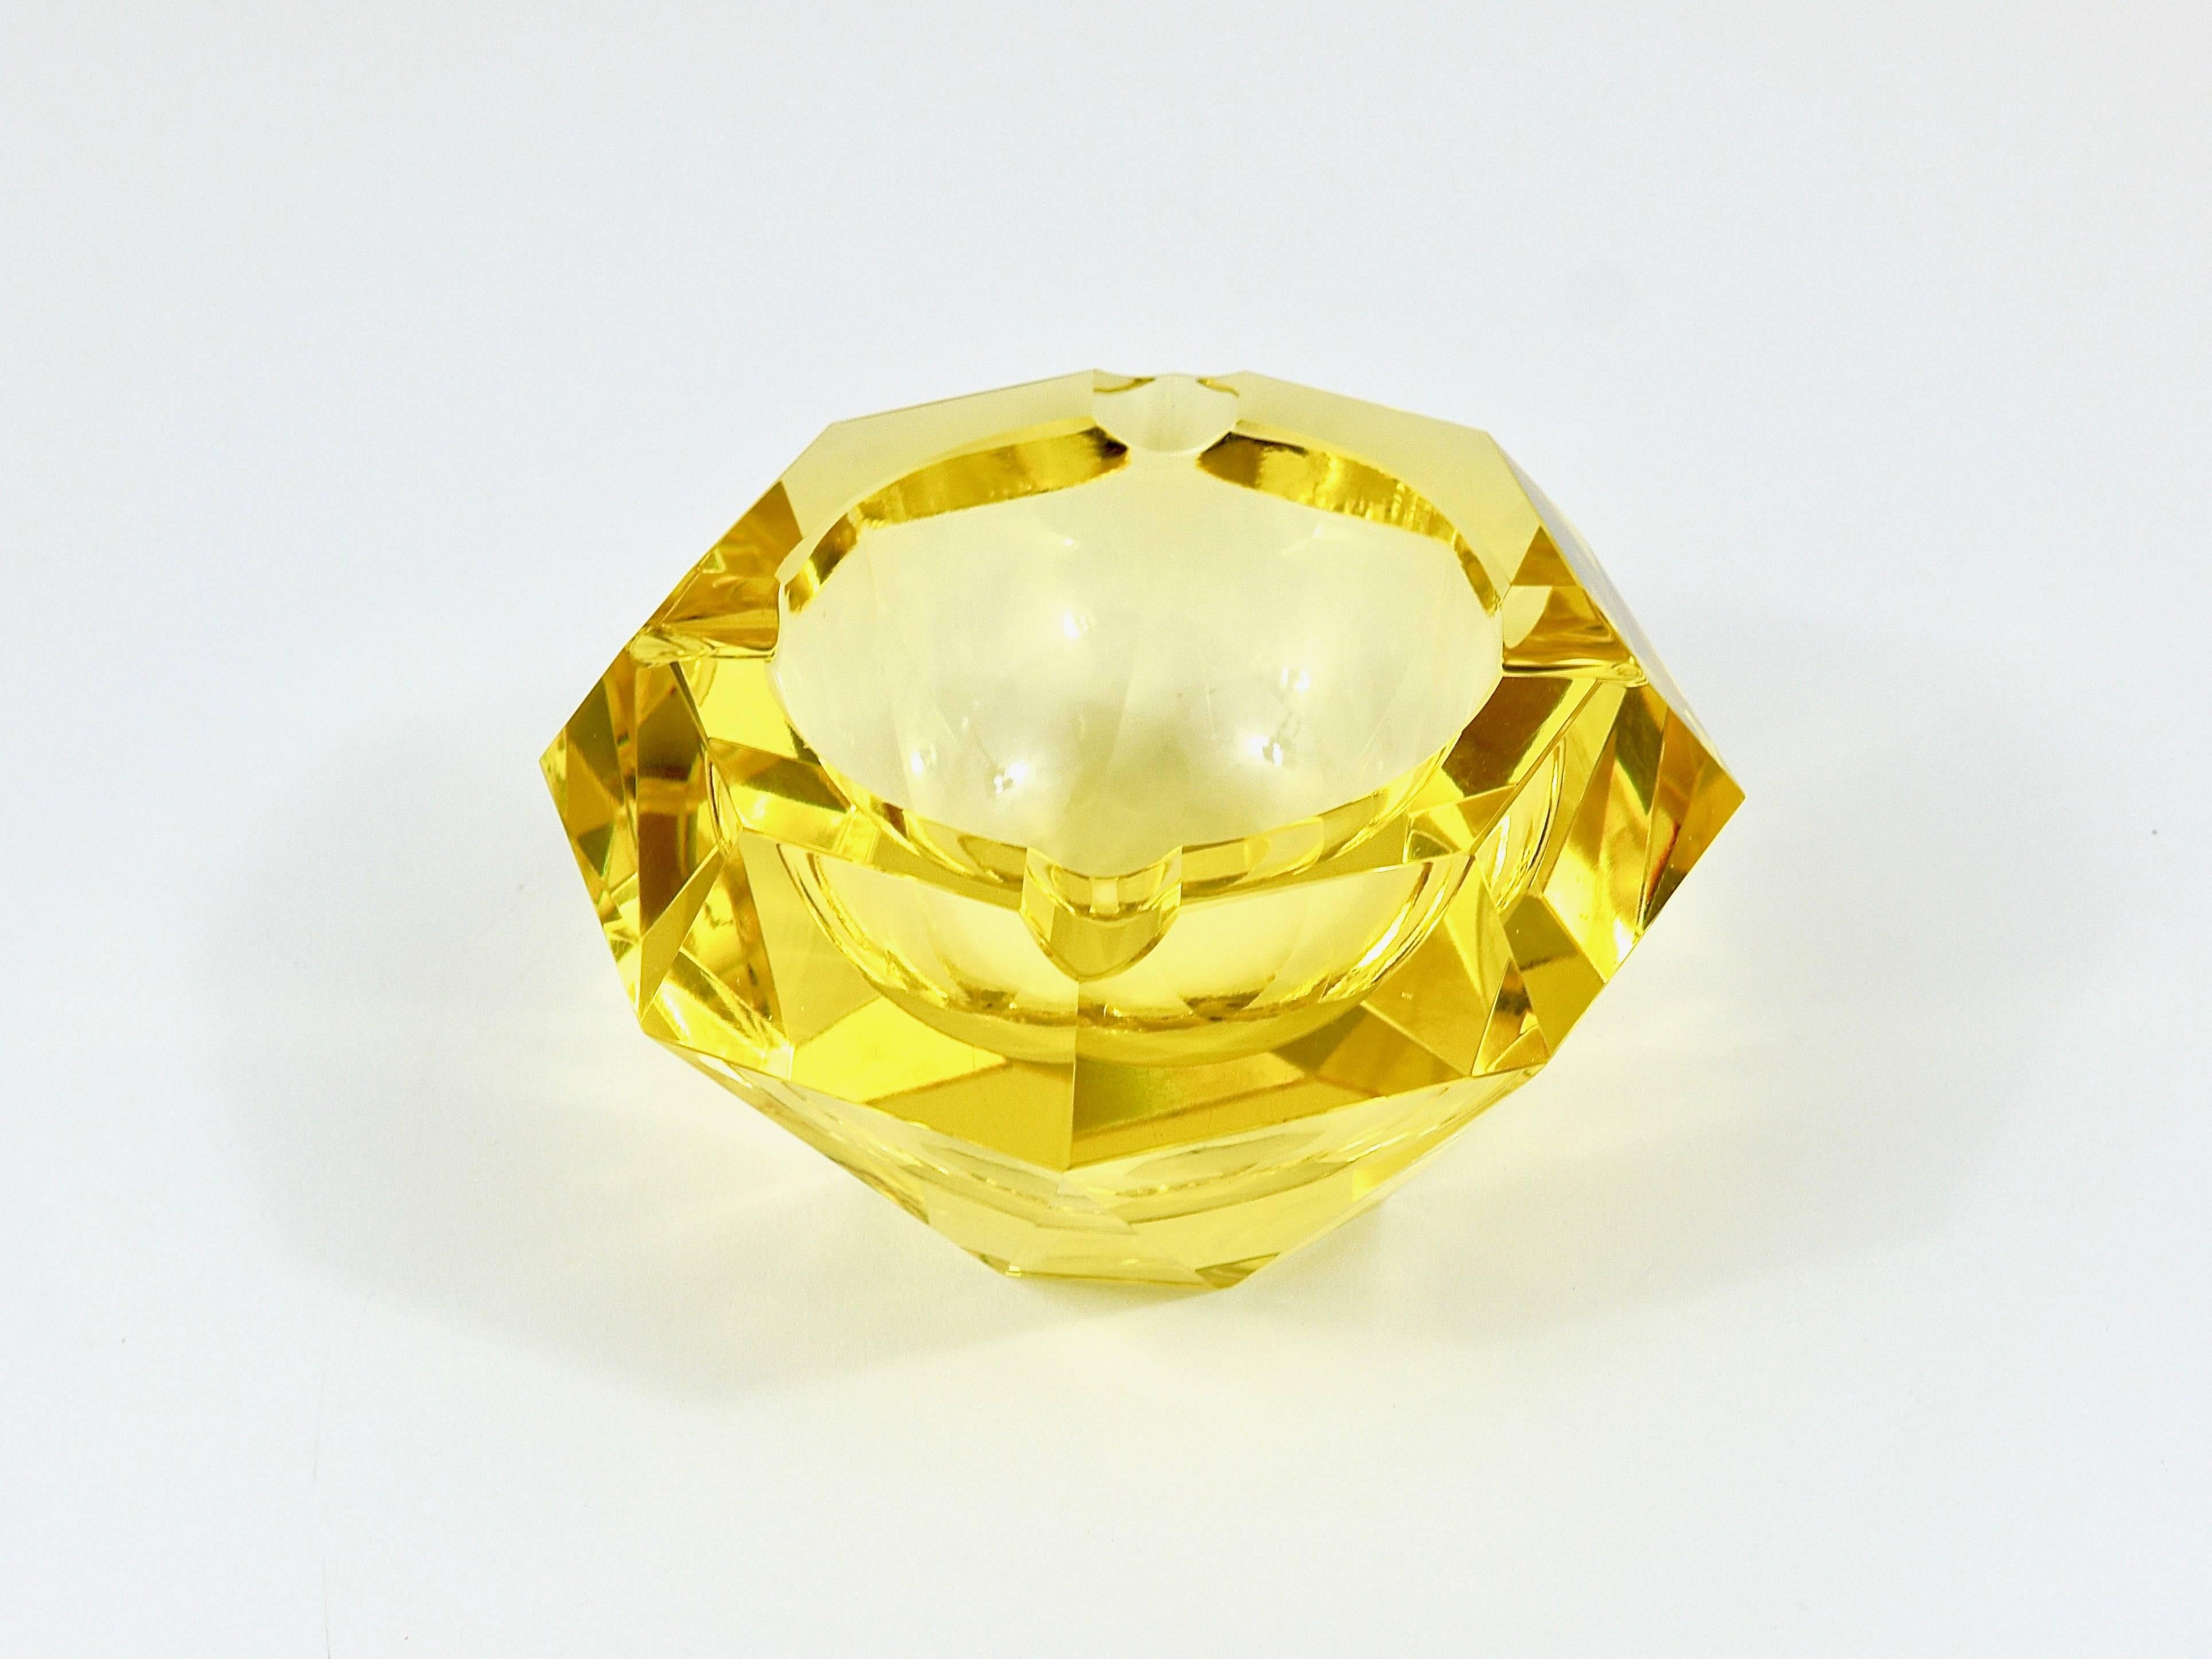 Art Deco 1930s Lemon Faceted Diamond Ashtray in Excellent Condition, Murano, Italy